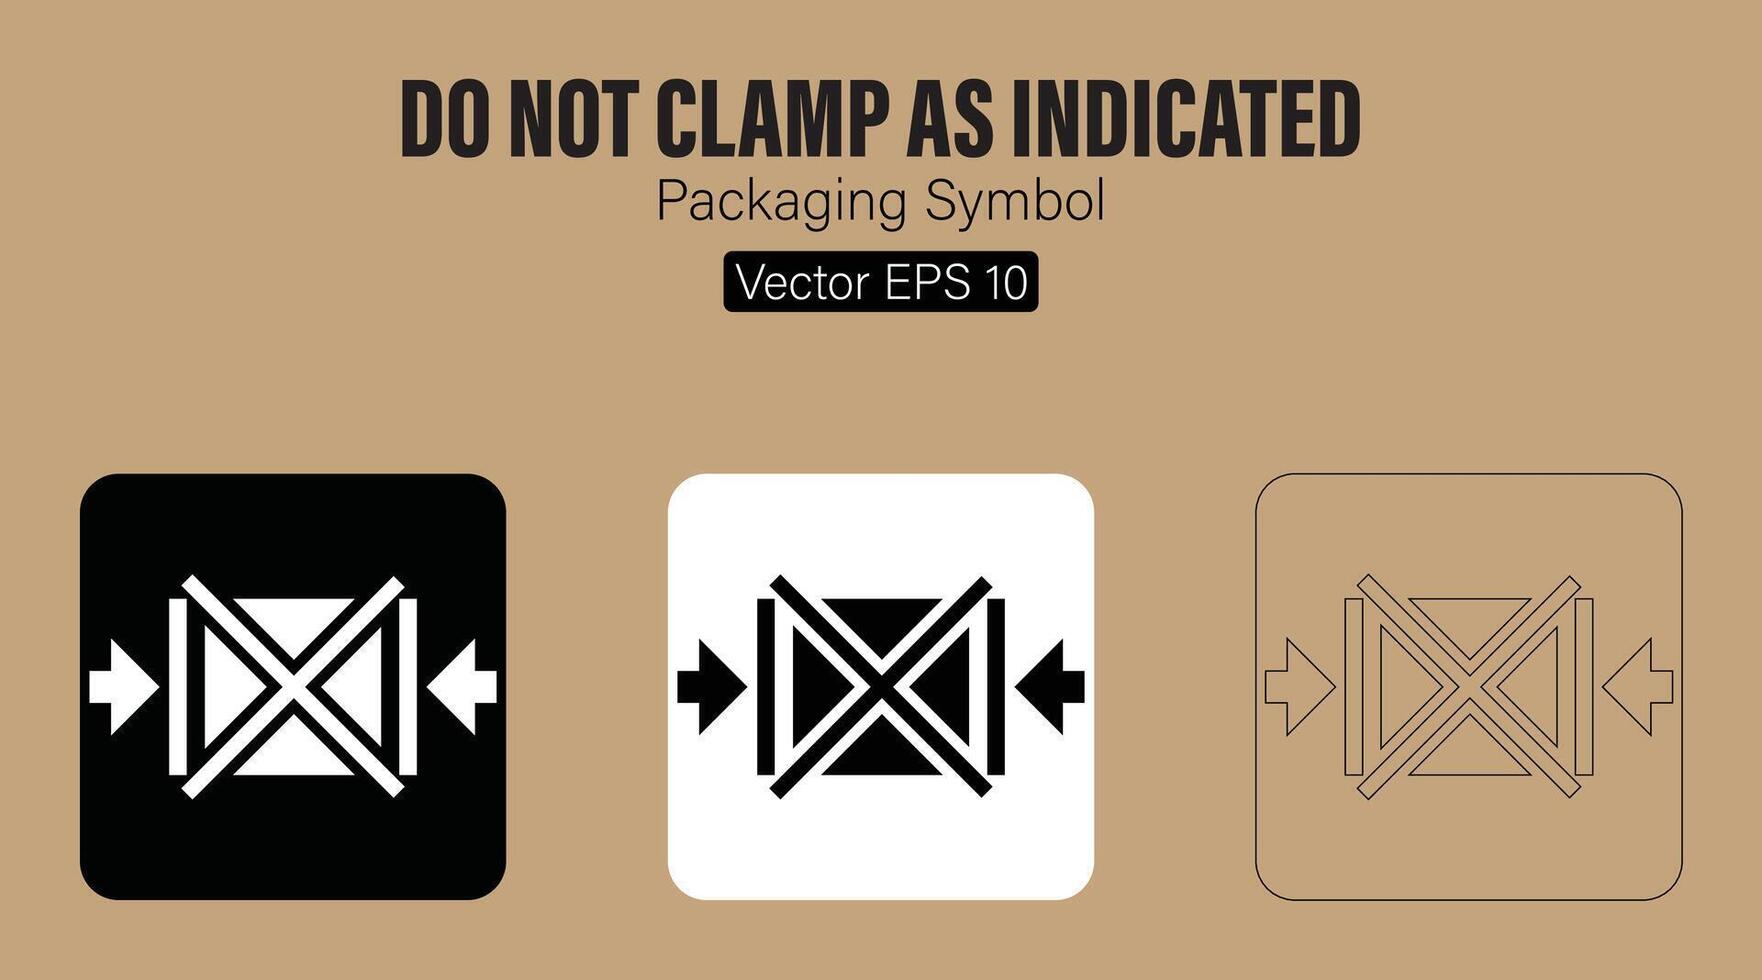 Do Not Clamp As Indicated Packaging Symbol vector